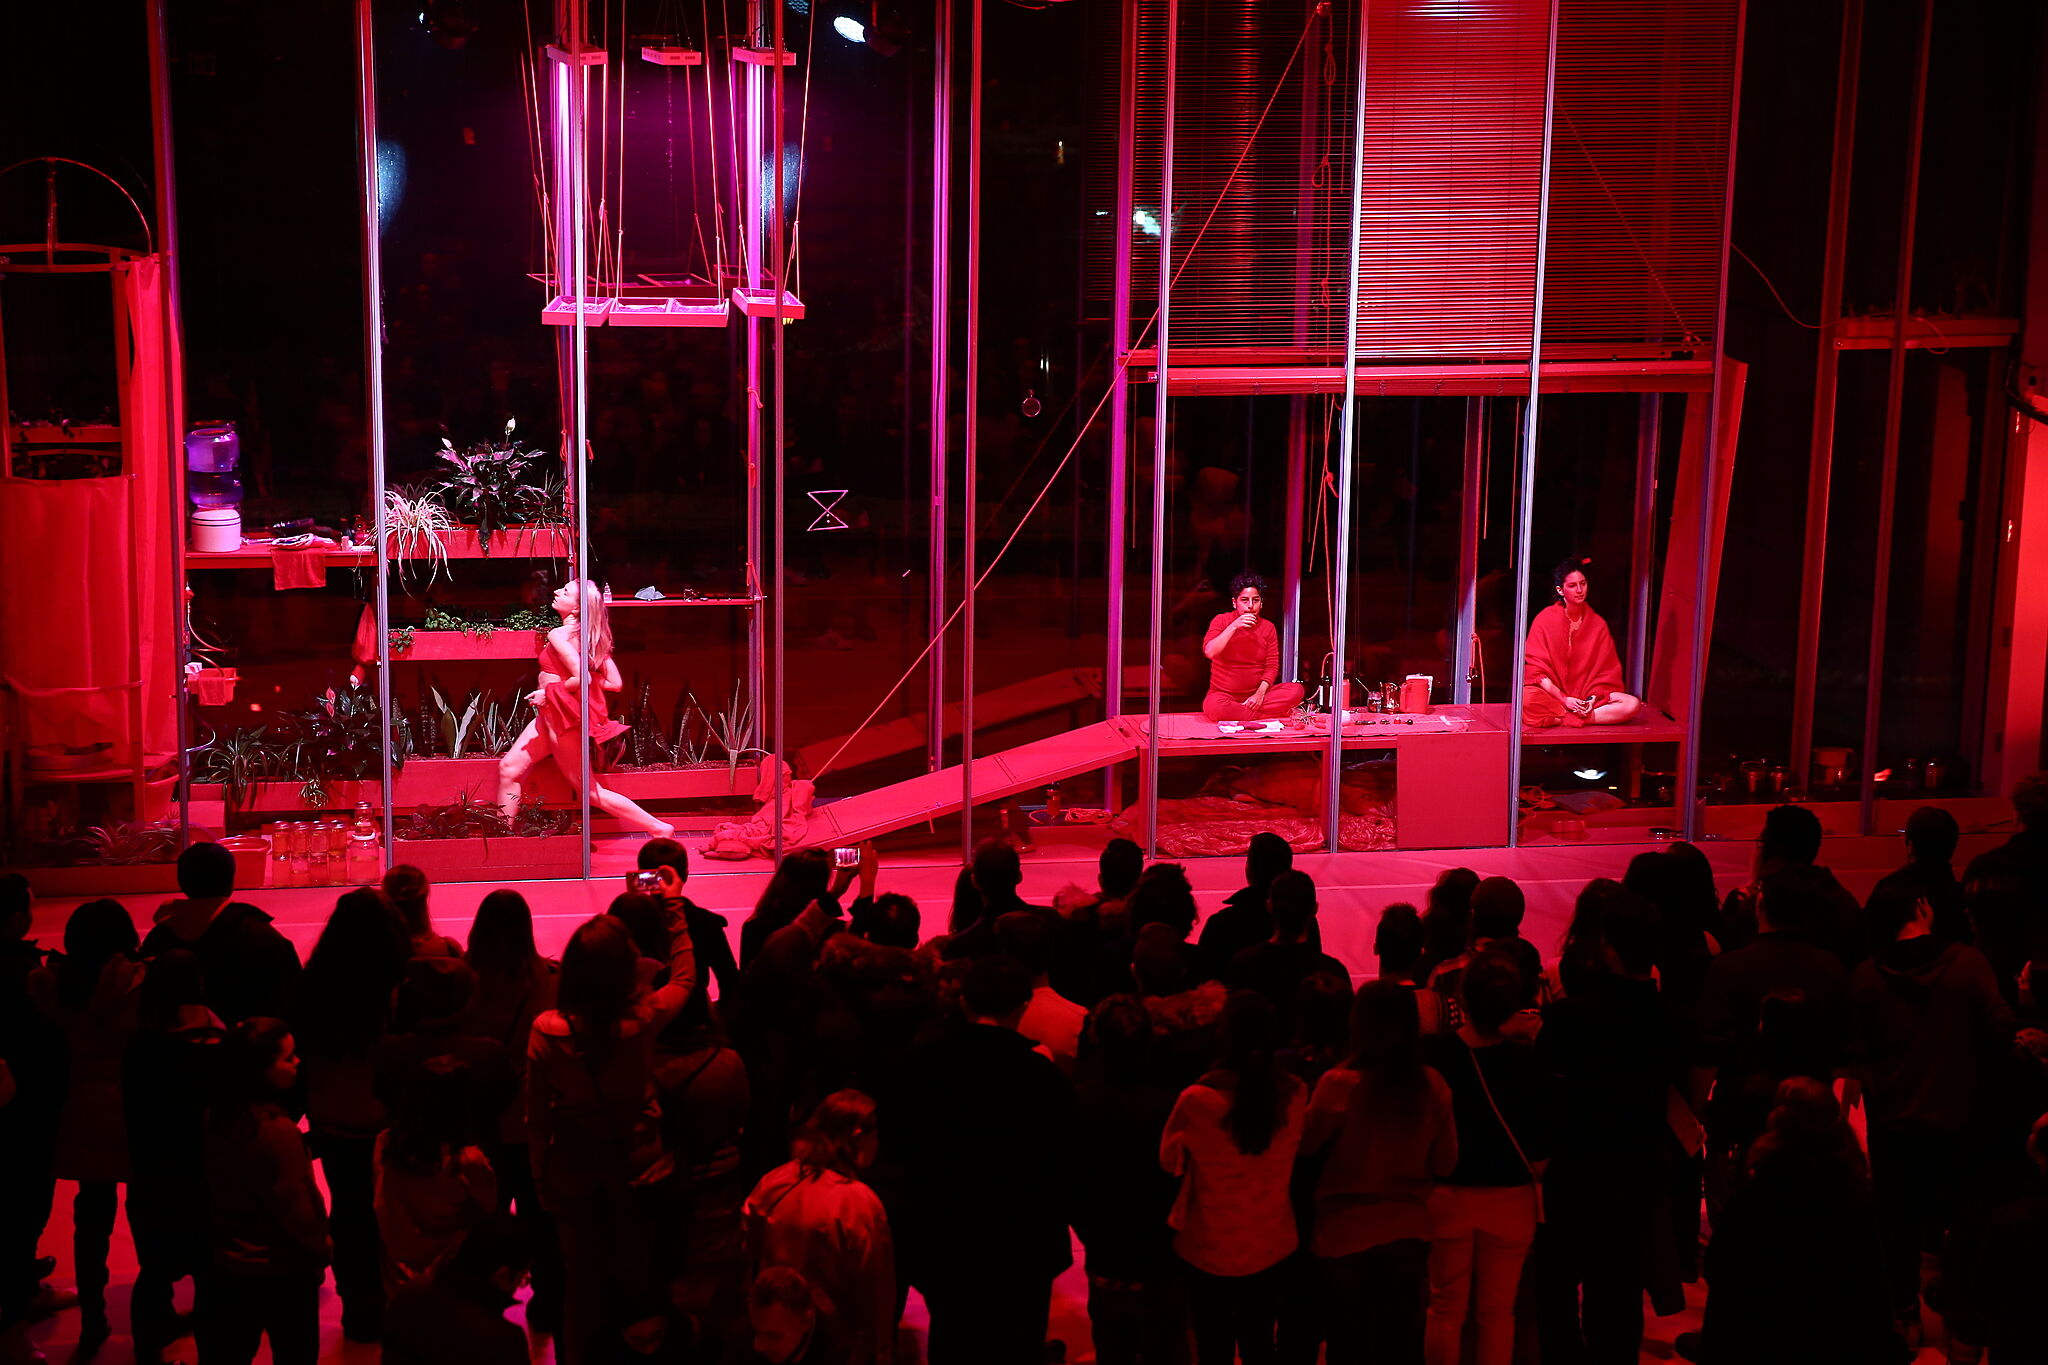 night view of the performance space and audience